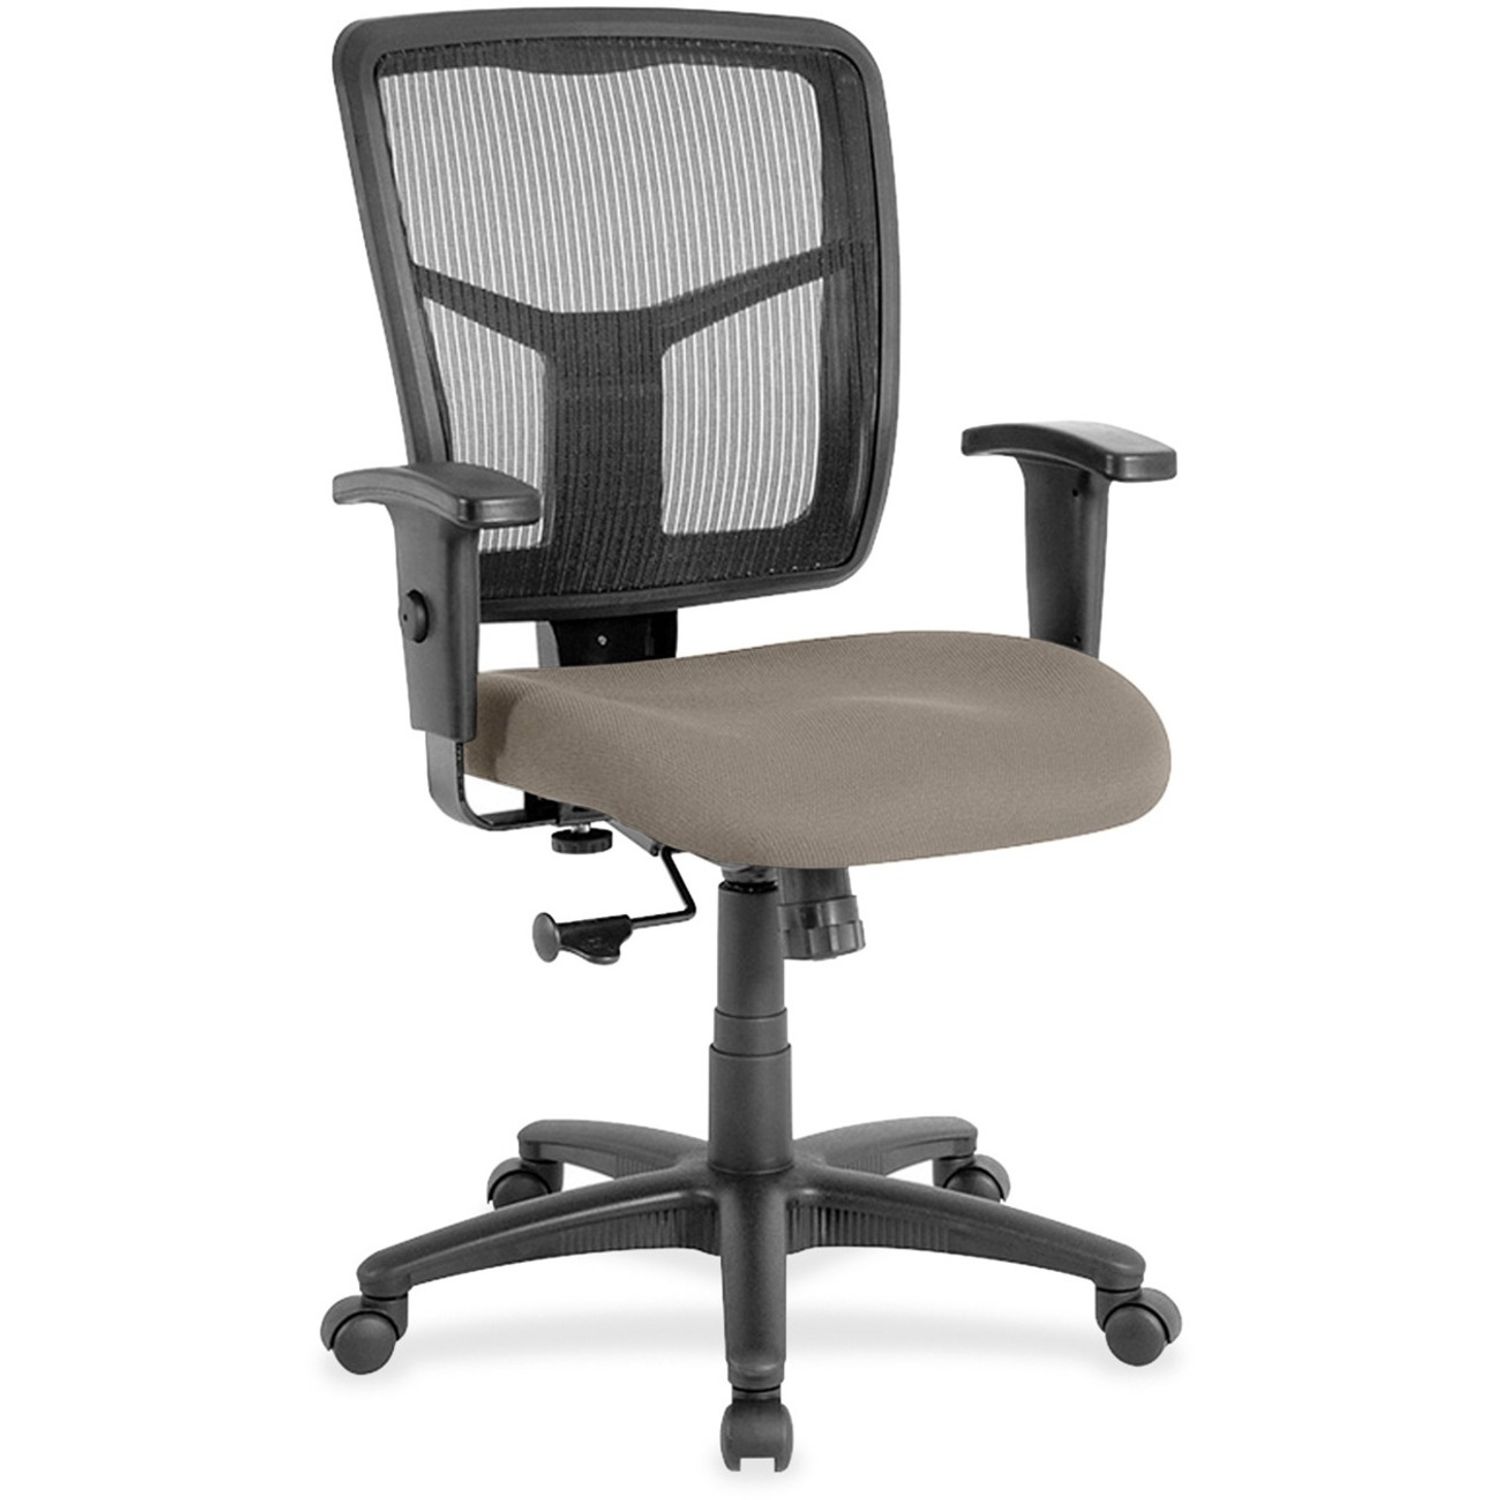 Managerial Mesh Mid-back Chair Insight Fossill Fabric Seat, Black Back, Black Frame, 5-star Base, 1 Each